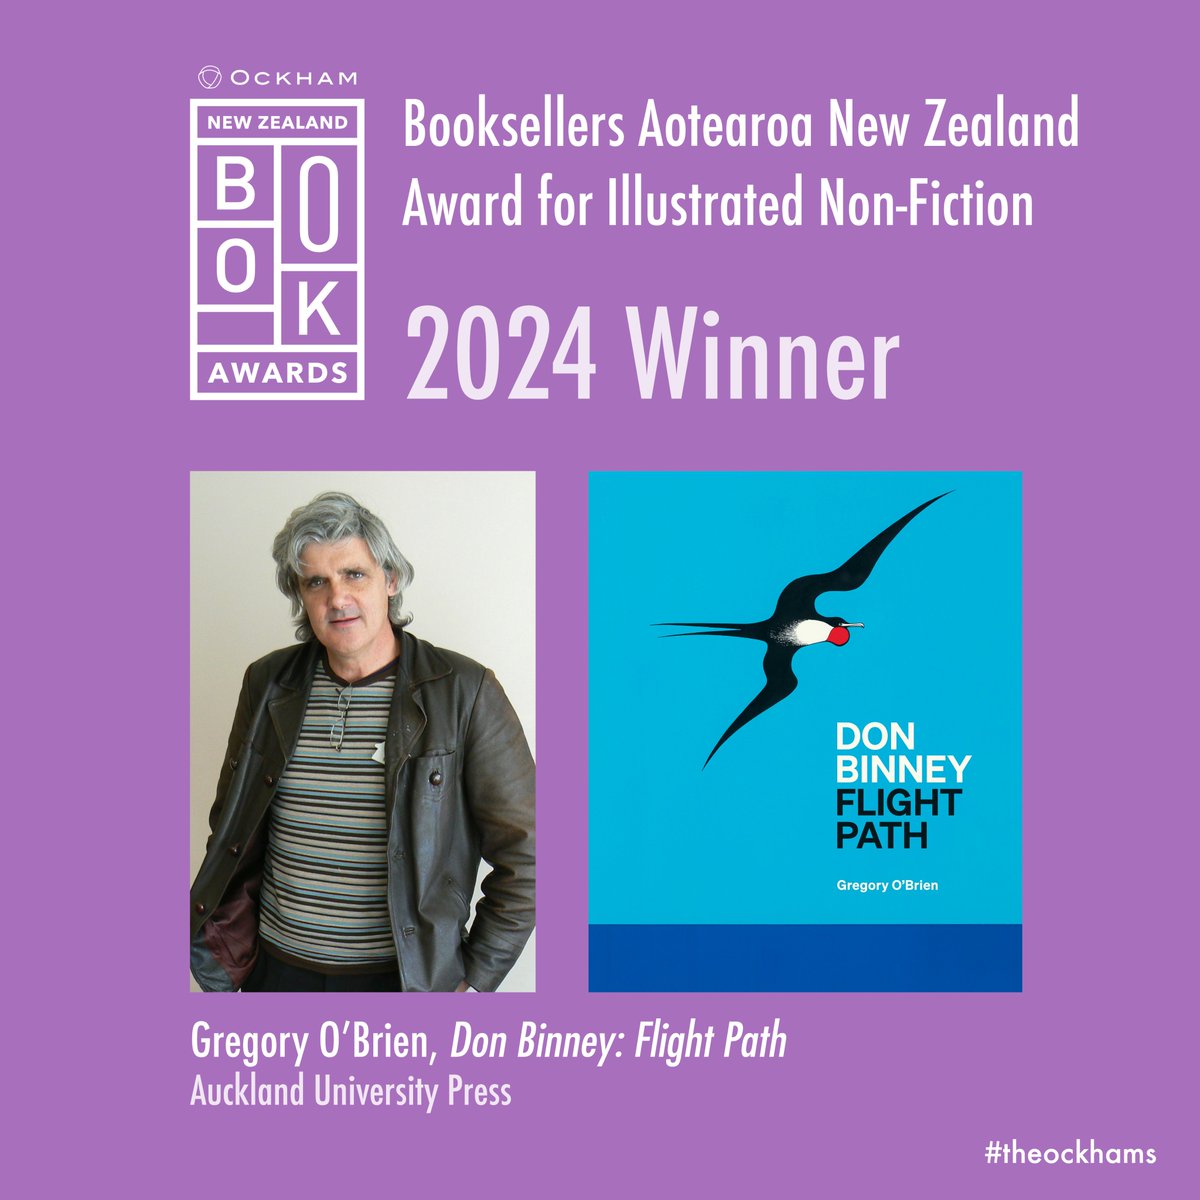 Congratulations to Gregory O'Brien, winner of the 2024 Booksellers Aotearoa New Zealand Award for Illustrated Non-Fiction! @AUPBooks #theockhams @BooksellersNZ